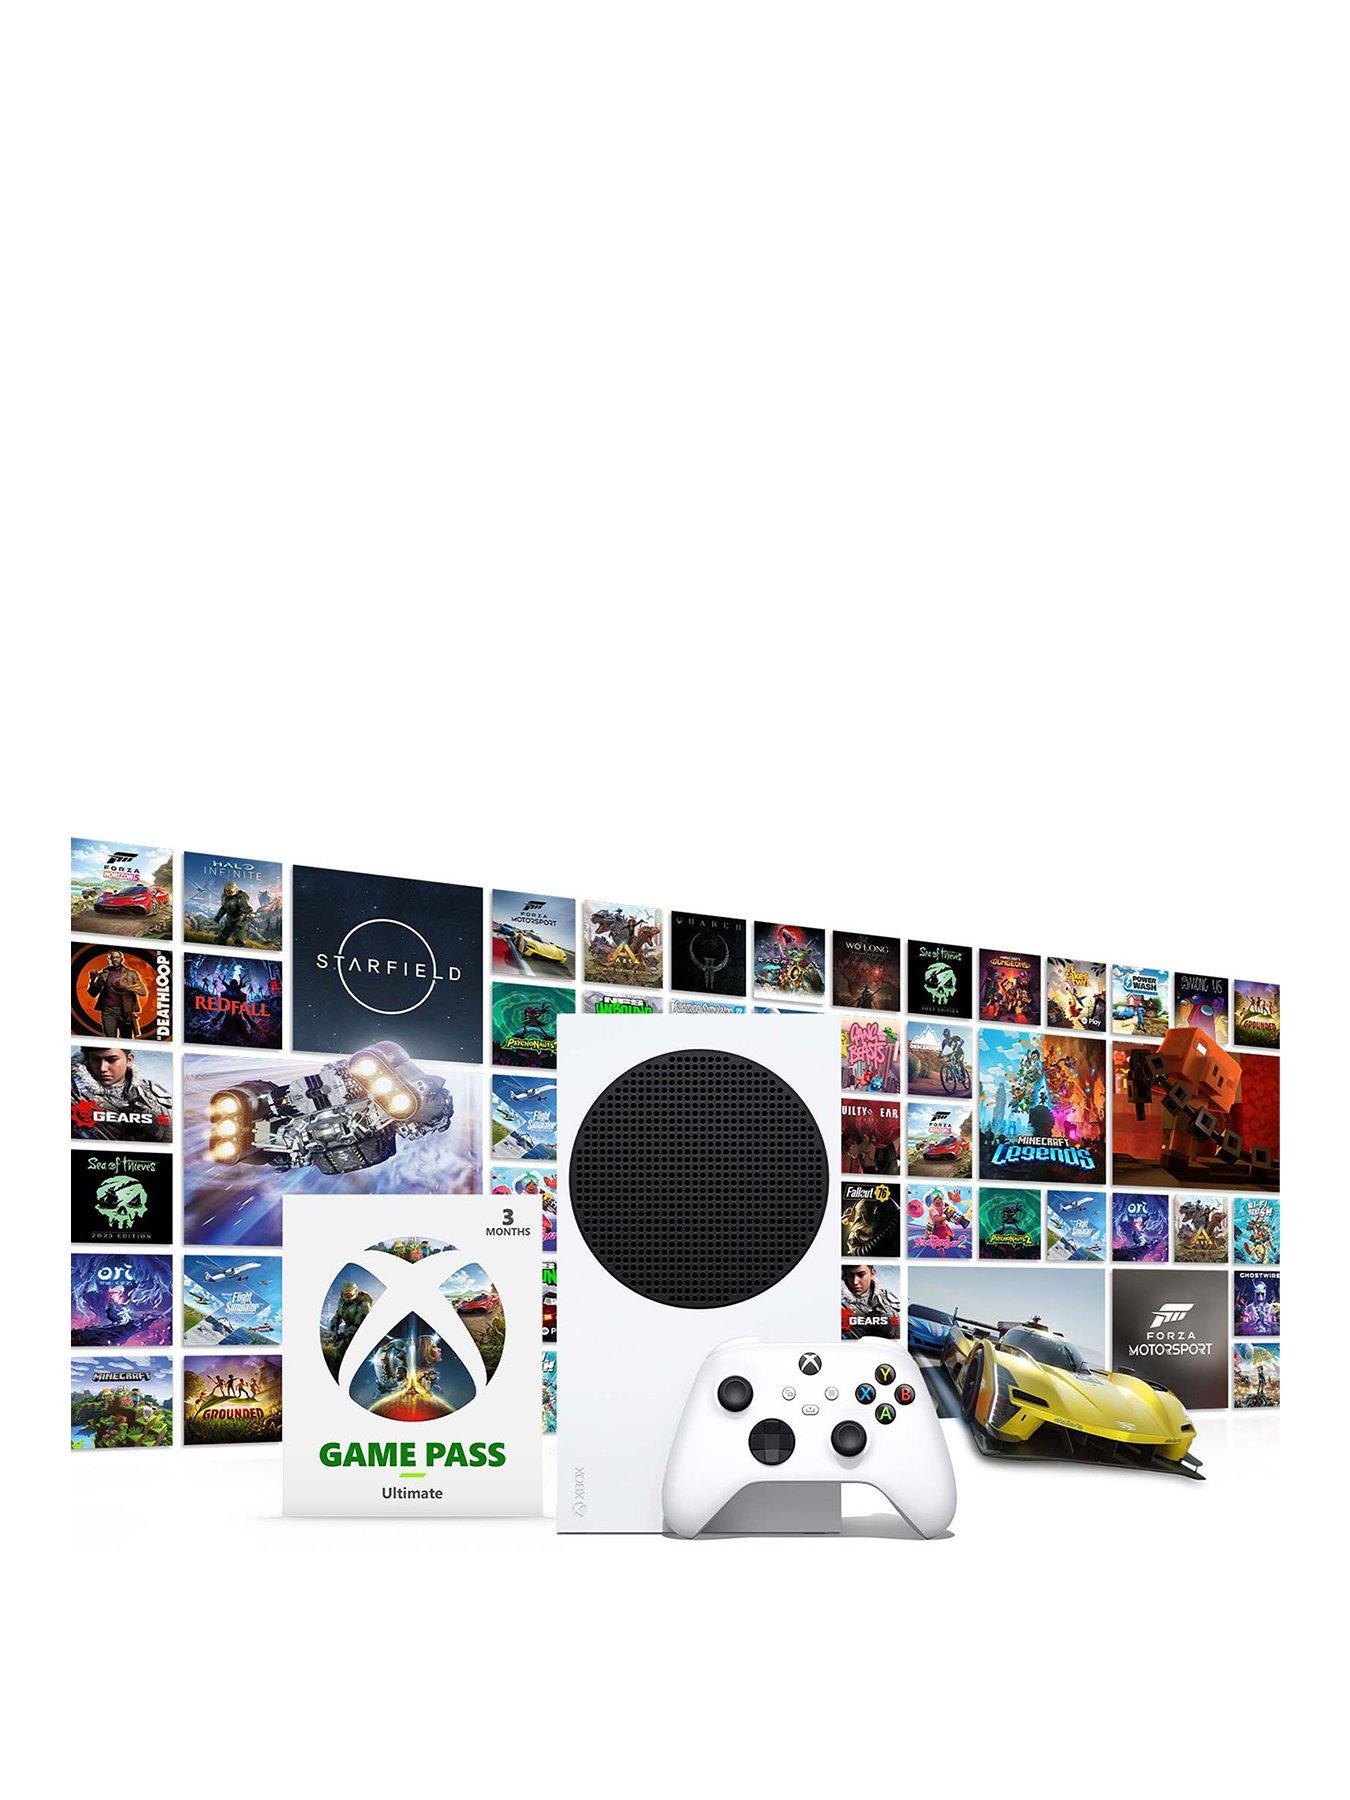  Xbox Series S – Starter Bundle - Includes hundreds of games  with Game Pass Ultimate 3 Month Membership - 512GB SSD All-Digital Gaming  Console